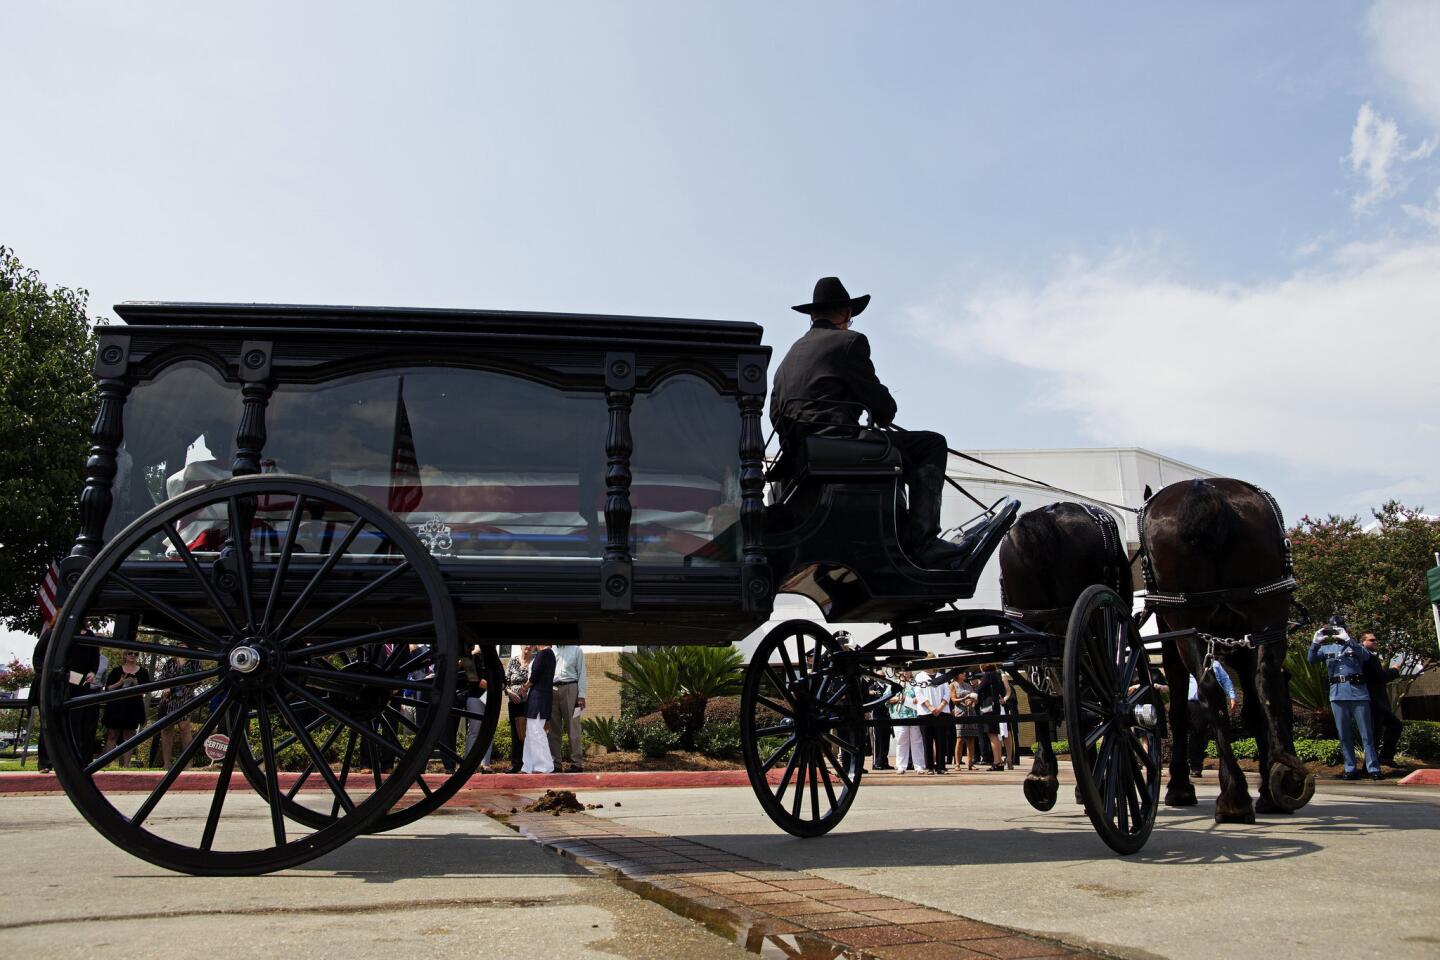 A horse-drawn carriage carries the casket of East Baton Rouge Sheriff deputy Brad Garafola at the Istrouma Baptist Church in Baton Rouge, La., on July 23, 2016.